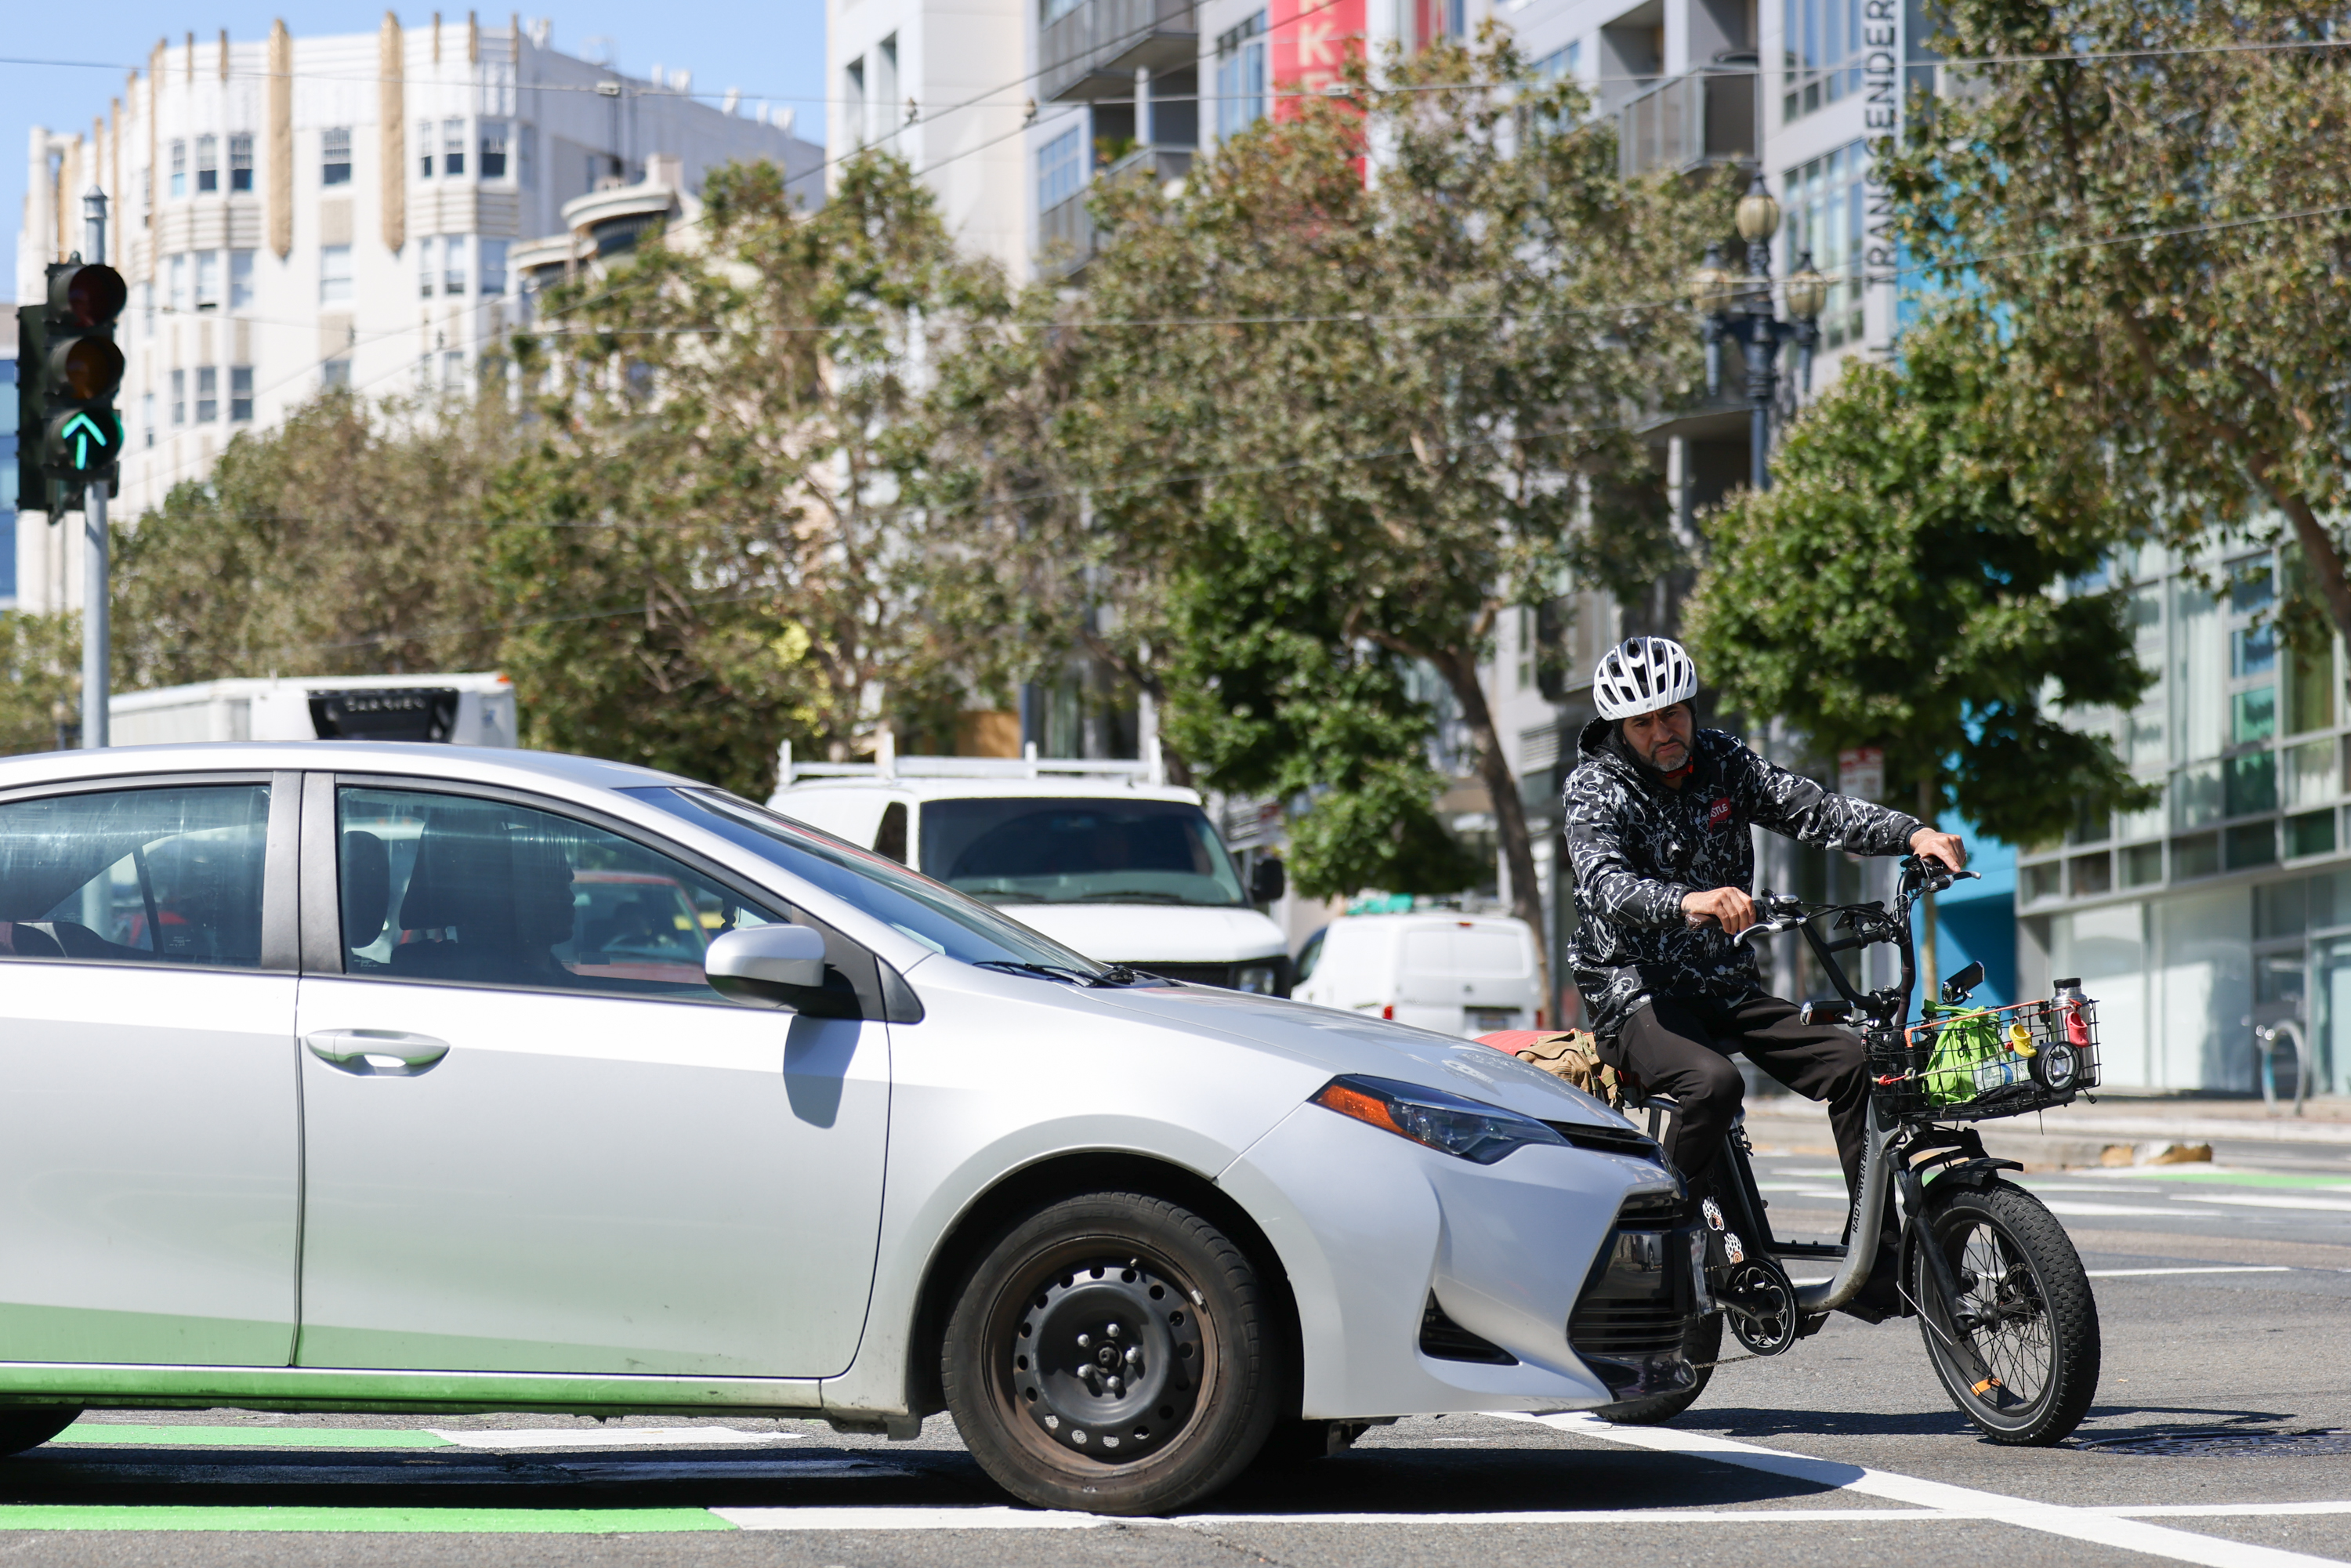 A cyclist maneuvers around gridlocked cars at the intersection.